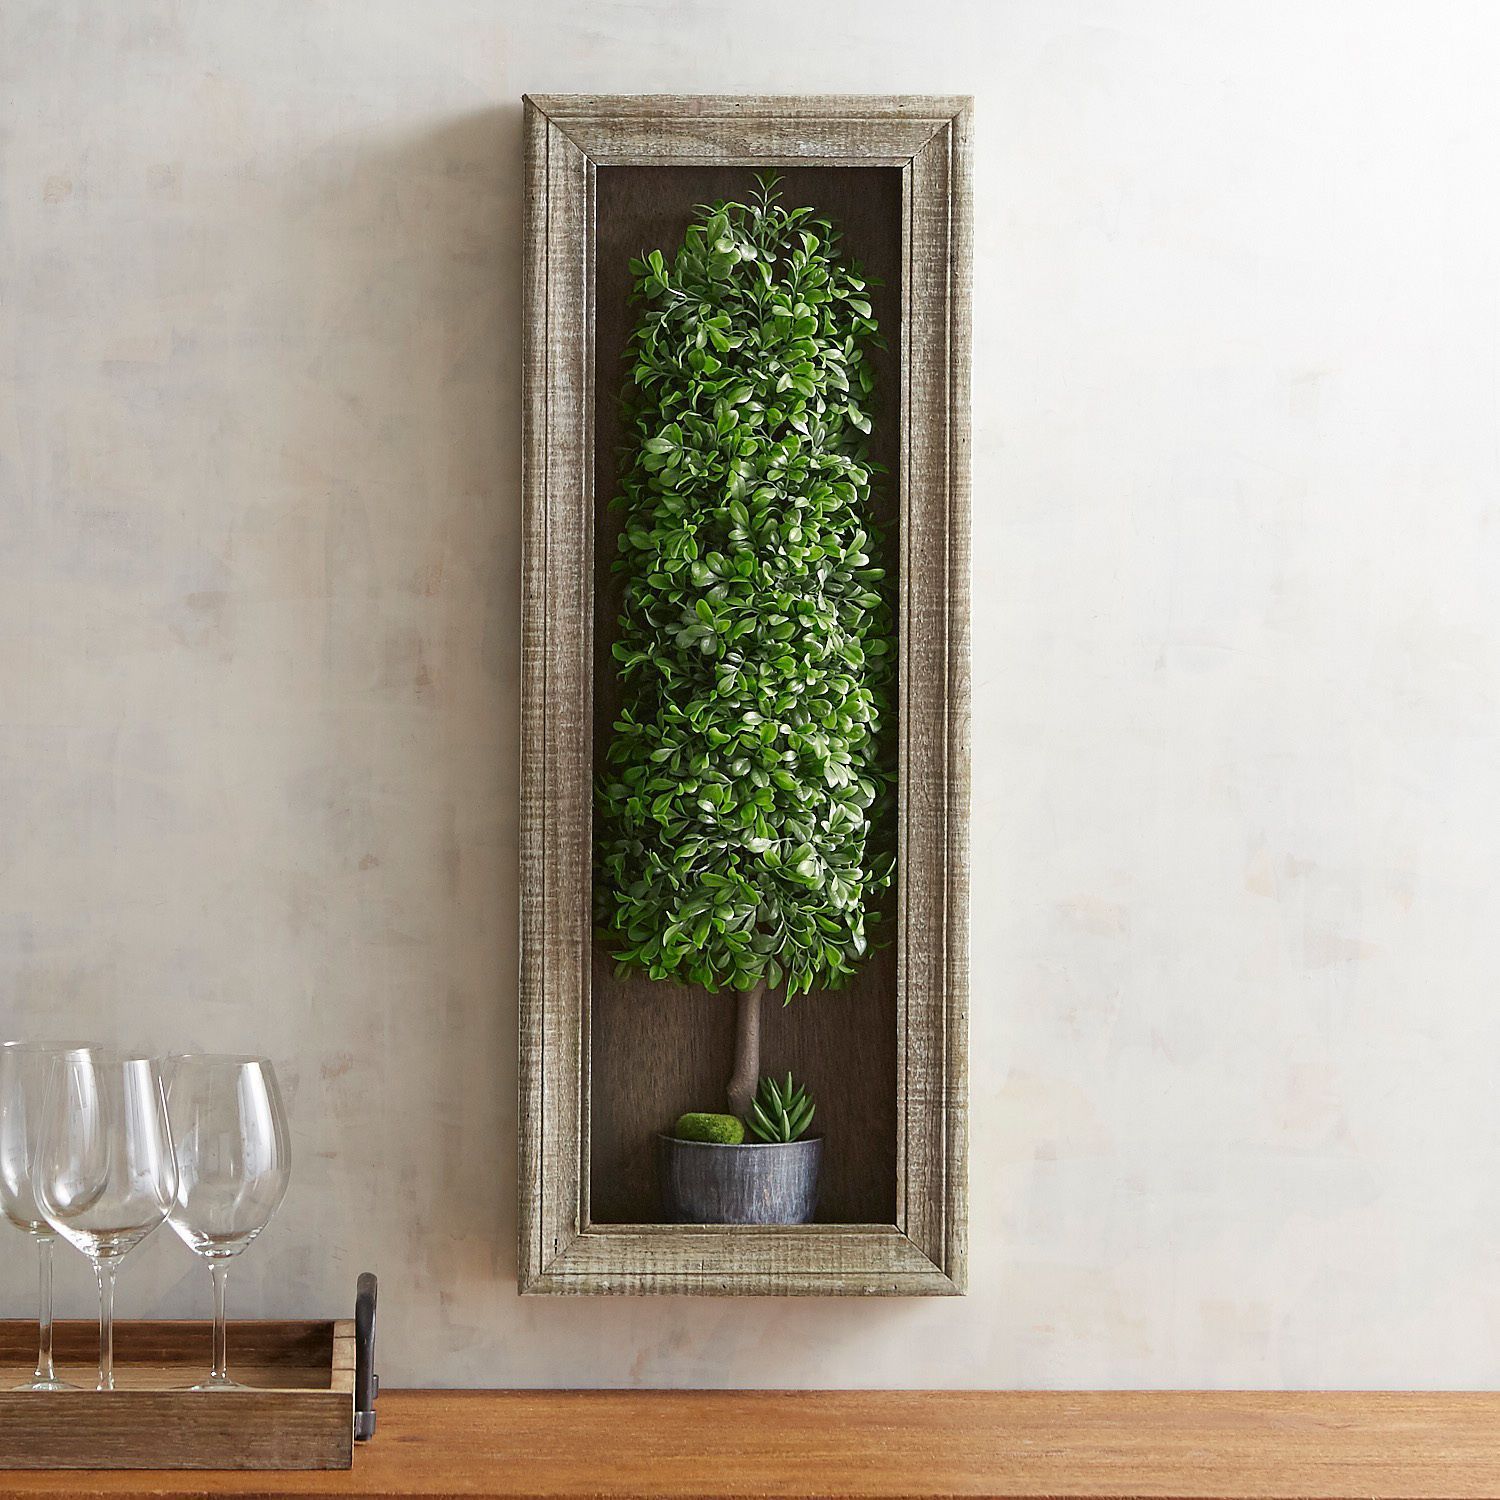 Faux Boxwood Topiary Shadow Box | Boxwood Topiary, Topiary, Wall Art Decor Throughout Best And Newest Box Wall Art (View 11 of 20)